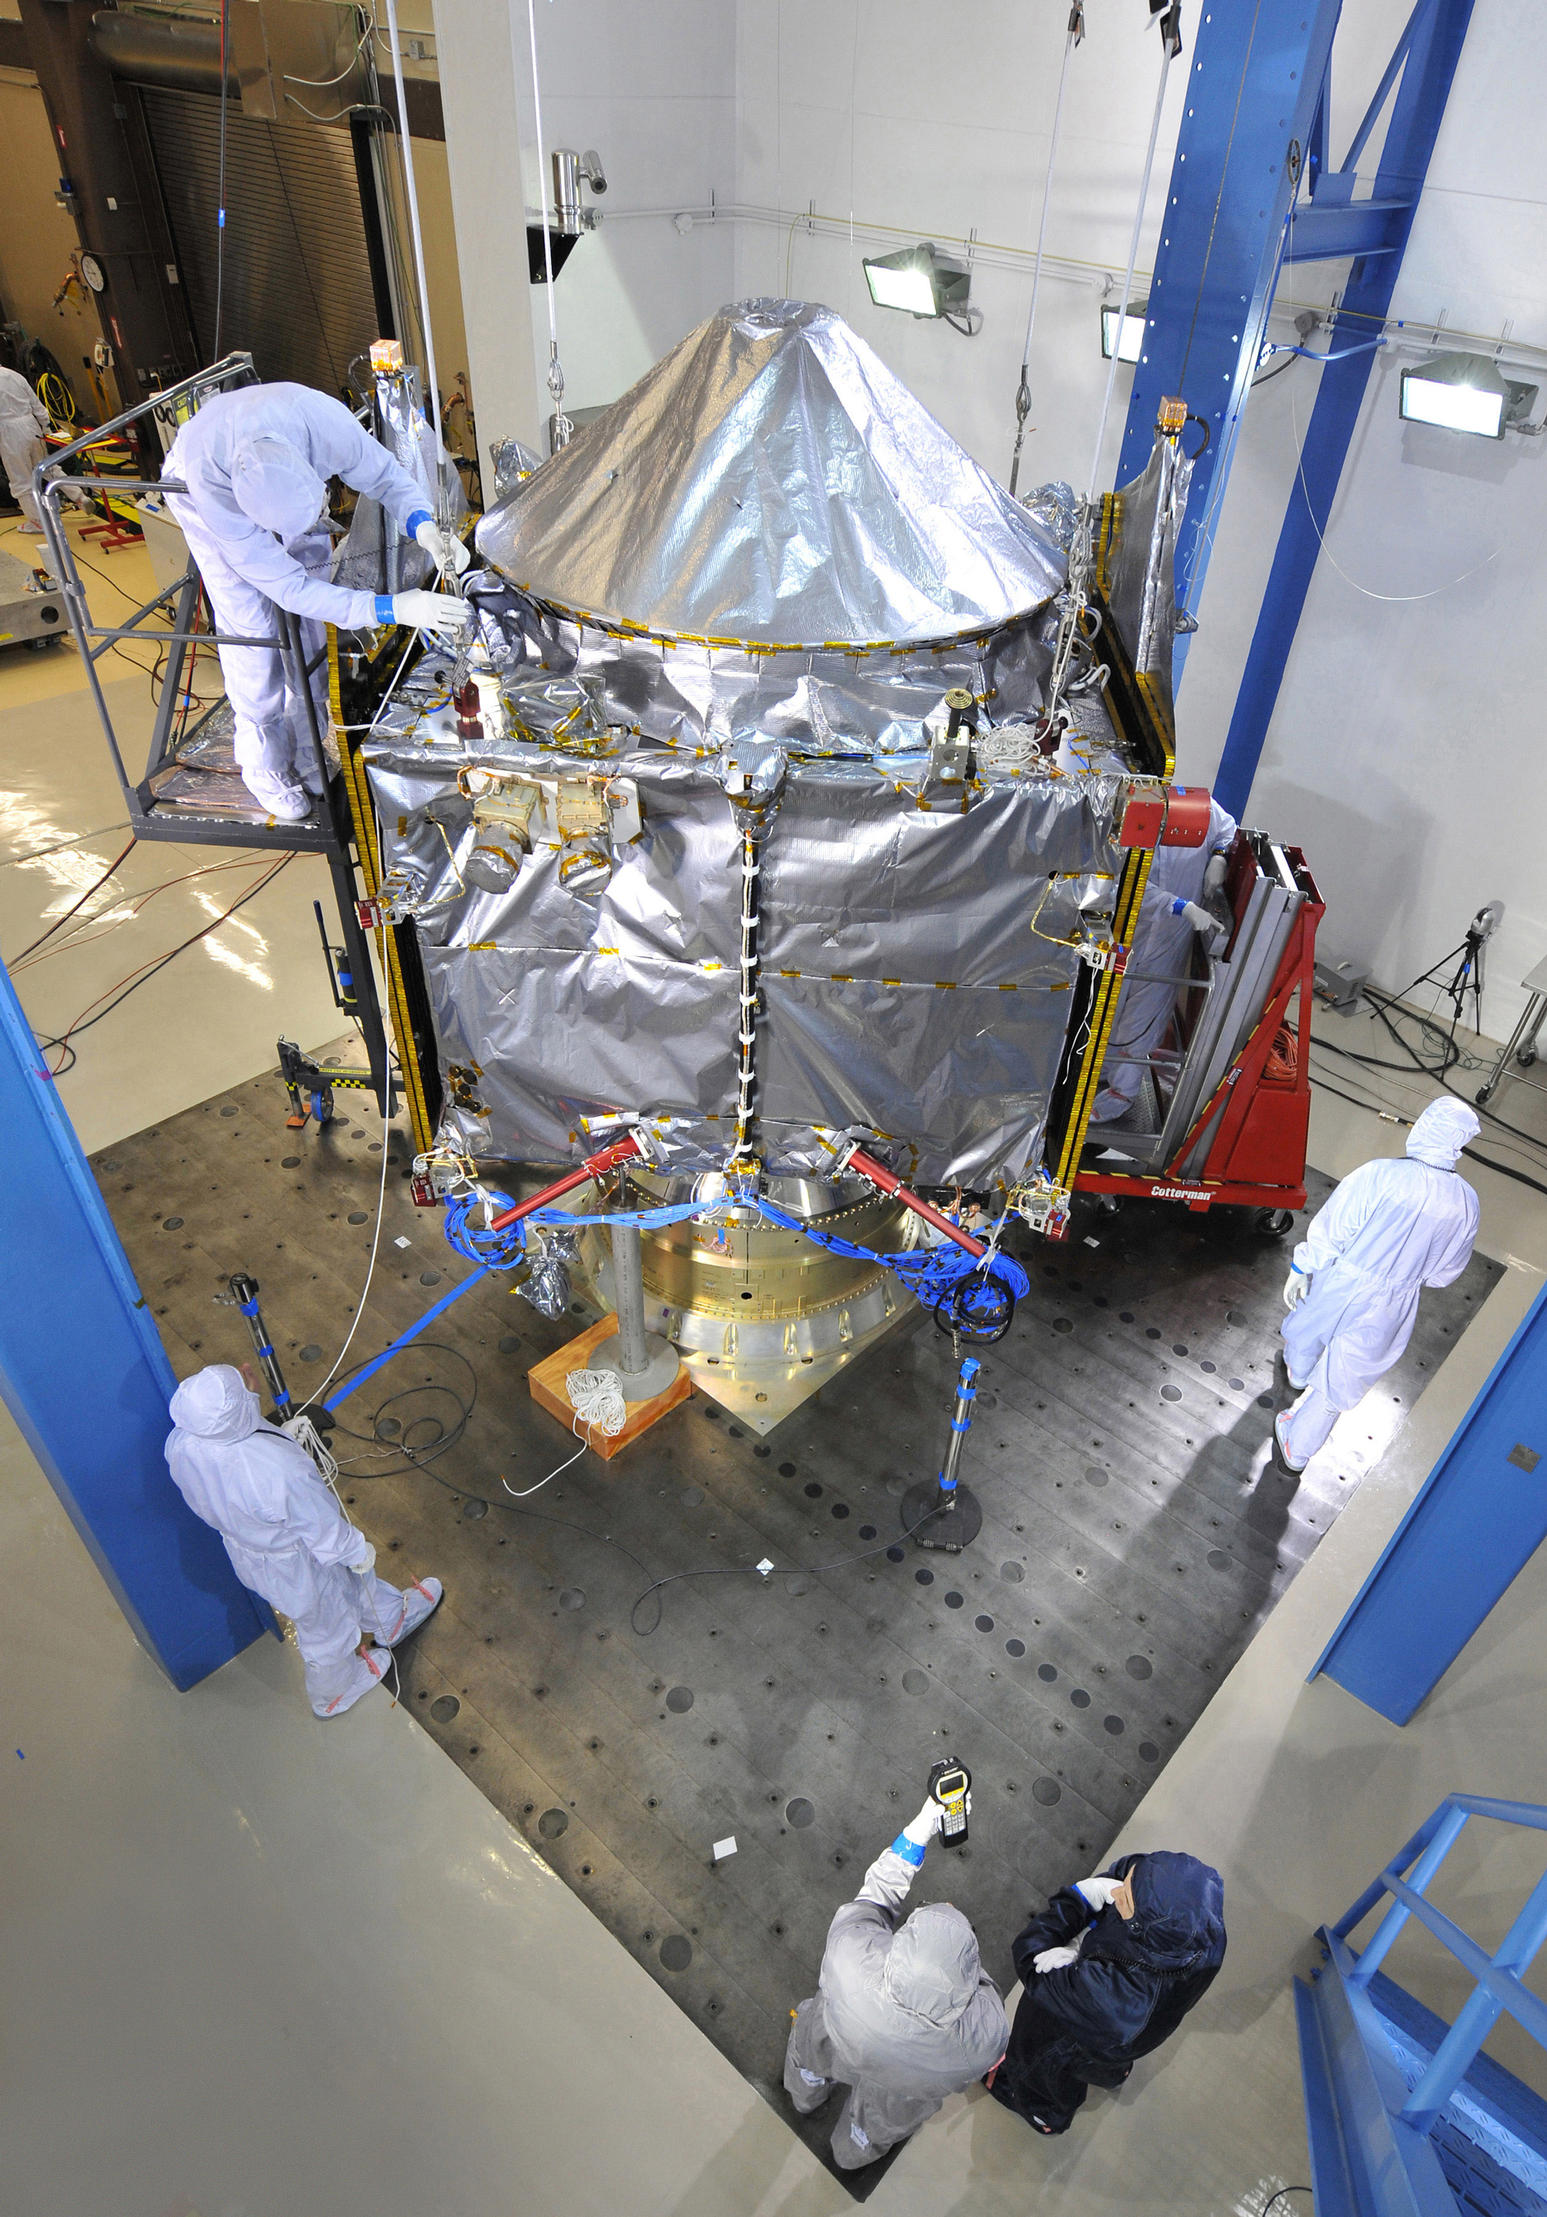 NASA's MAVEN spacecraft underwent acoustics testing on Feb. 13, 2013 at Lockheed Martin Space Systems' Reverberant Acoustic Laboratory.